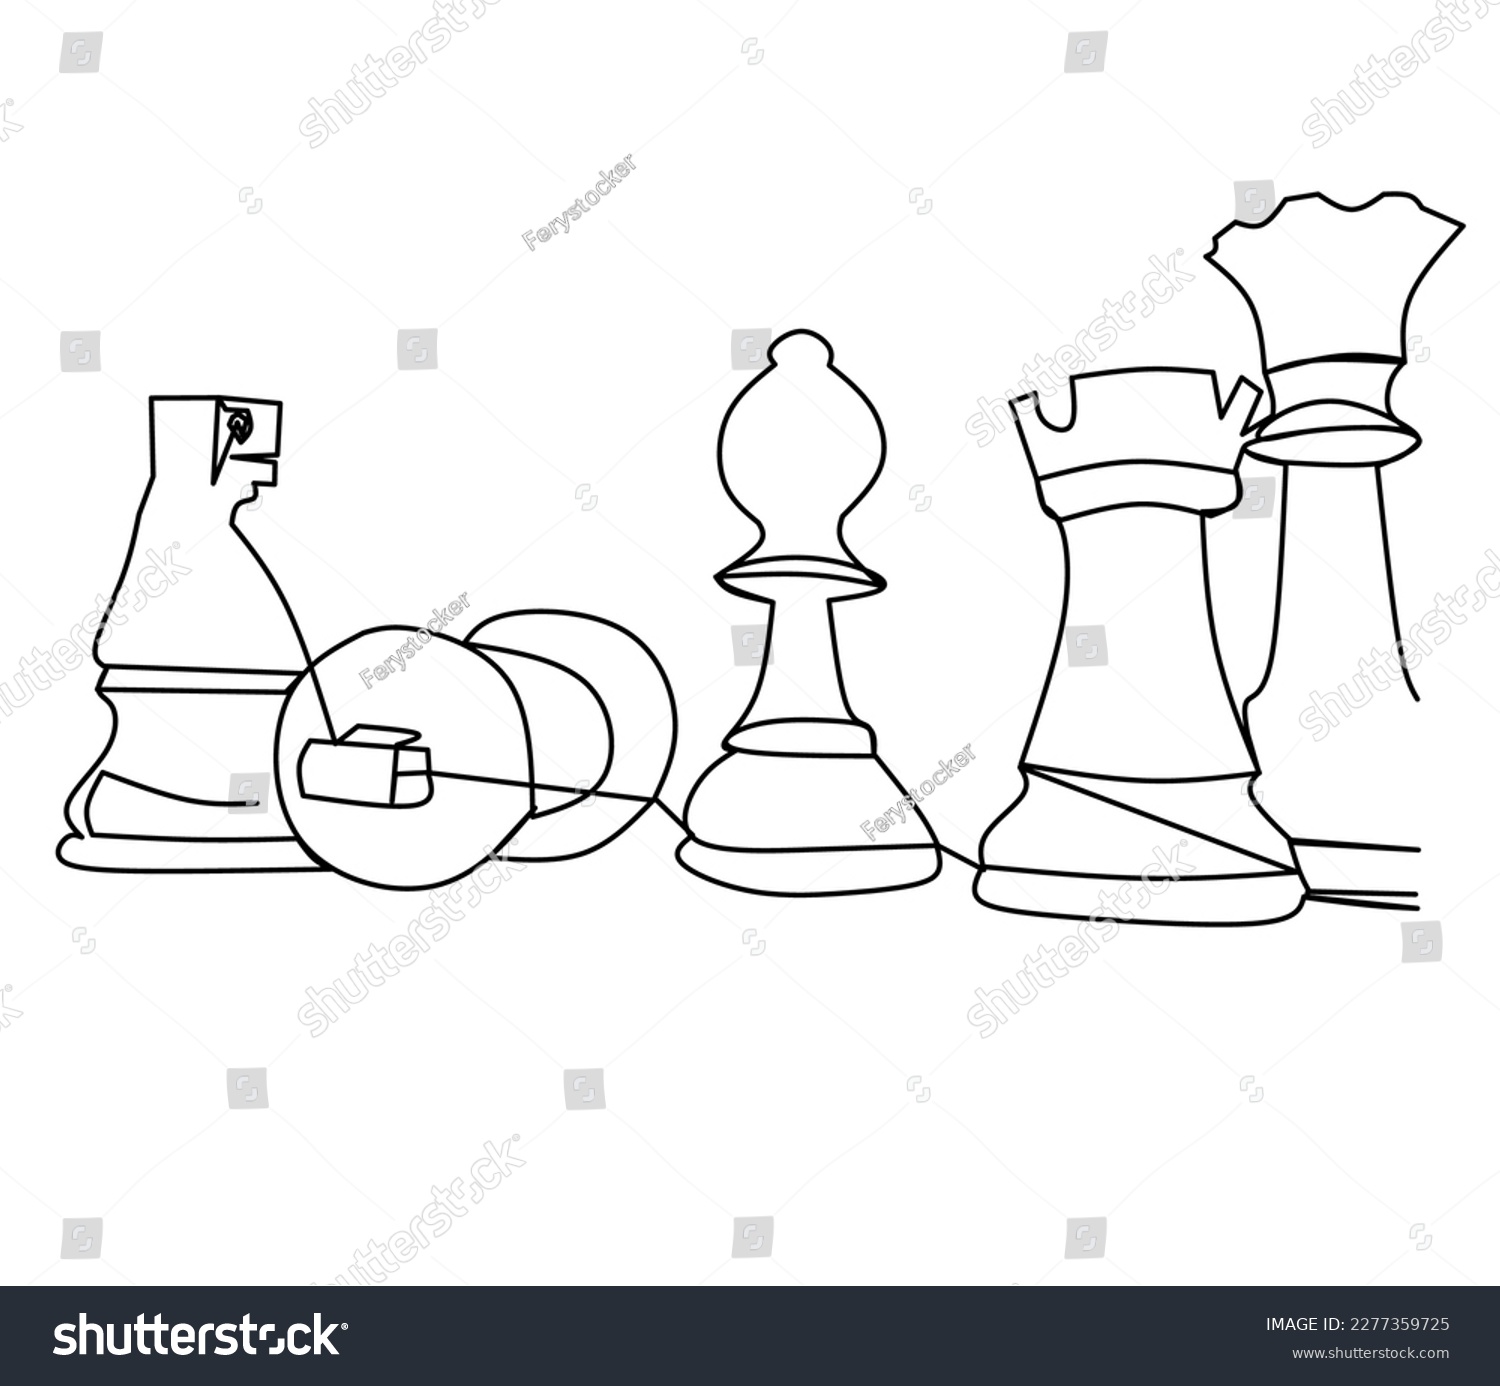 SVG of vector one line classic game of chess which is famous all over the world svg